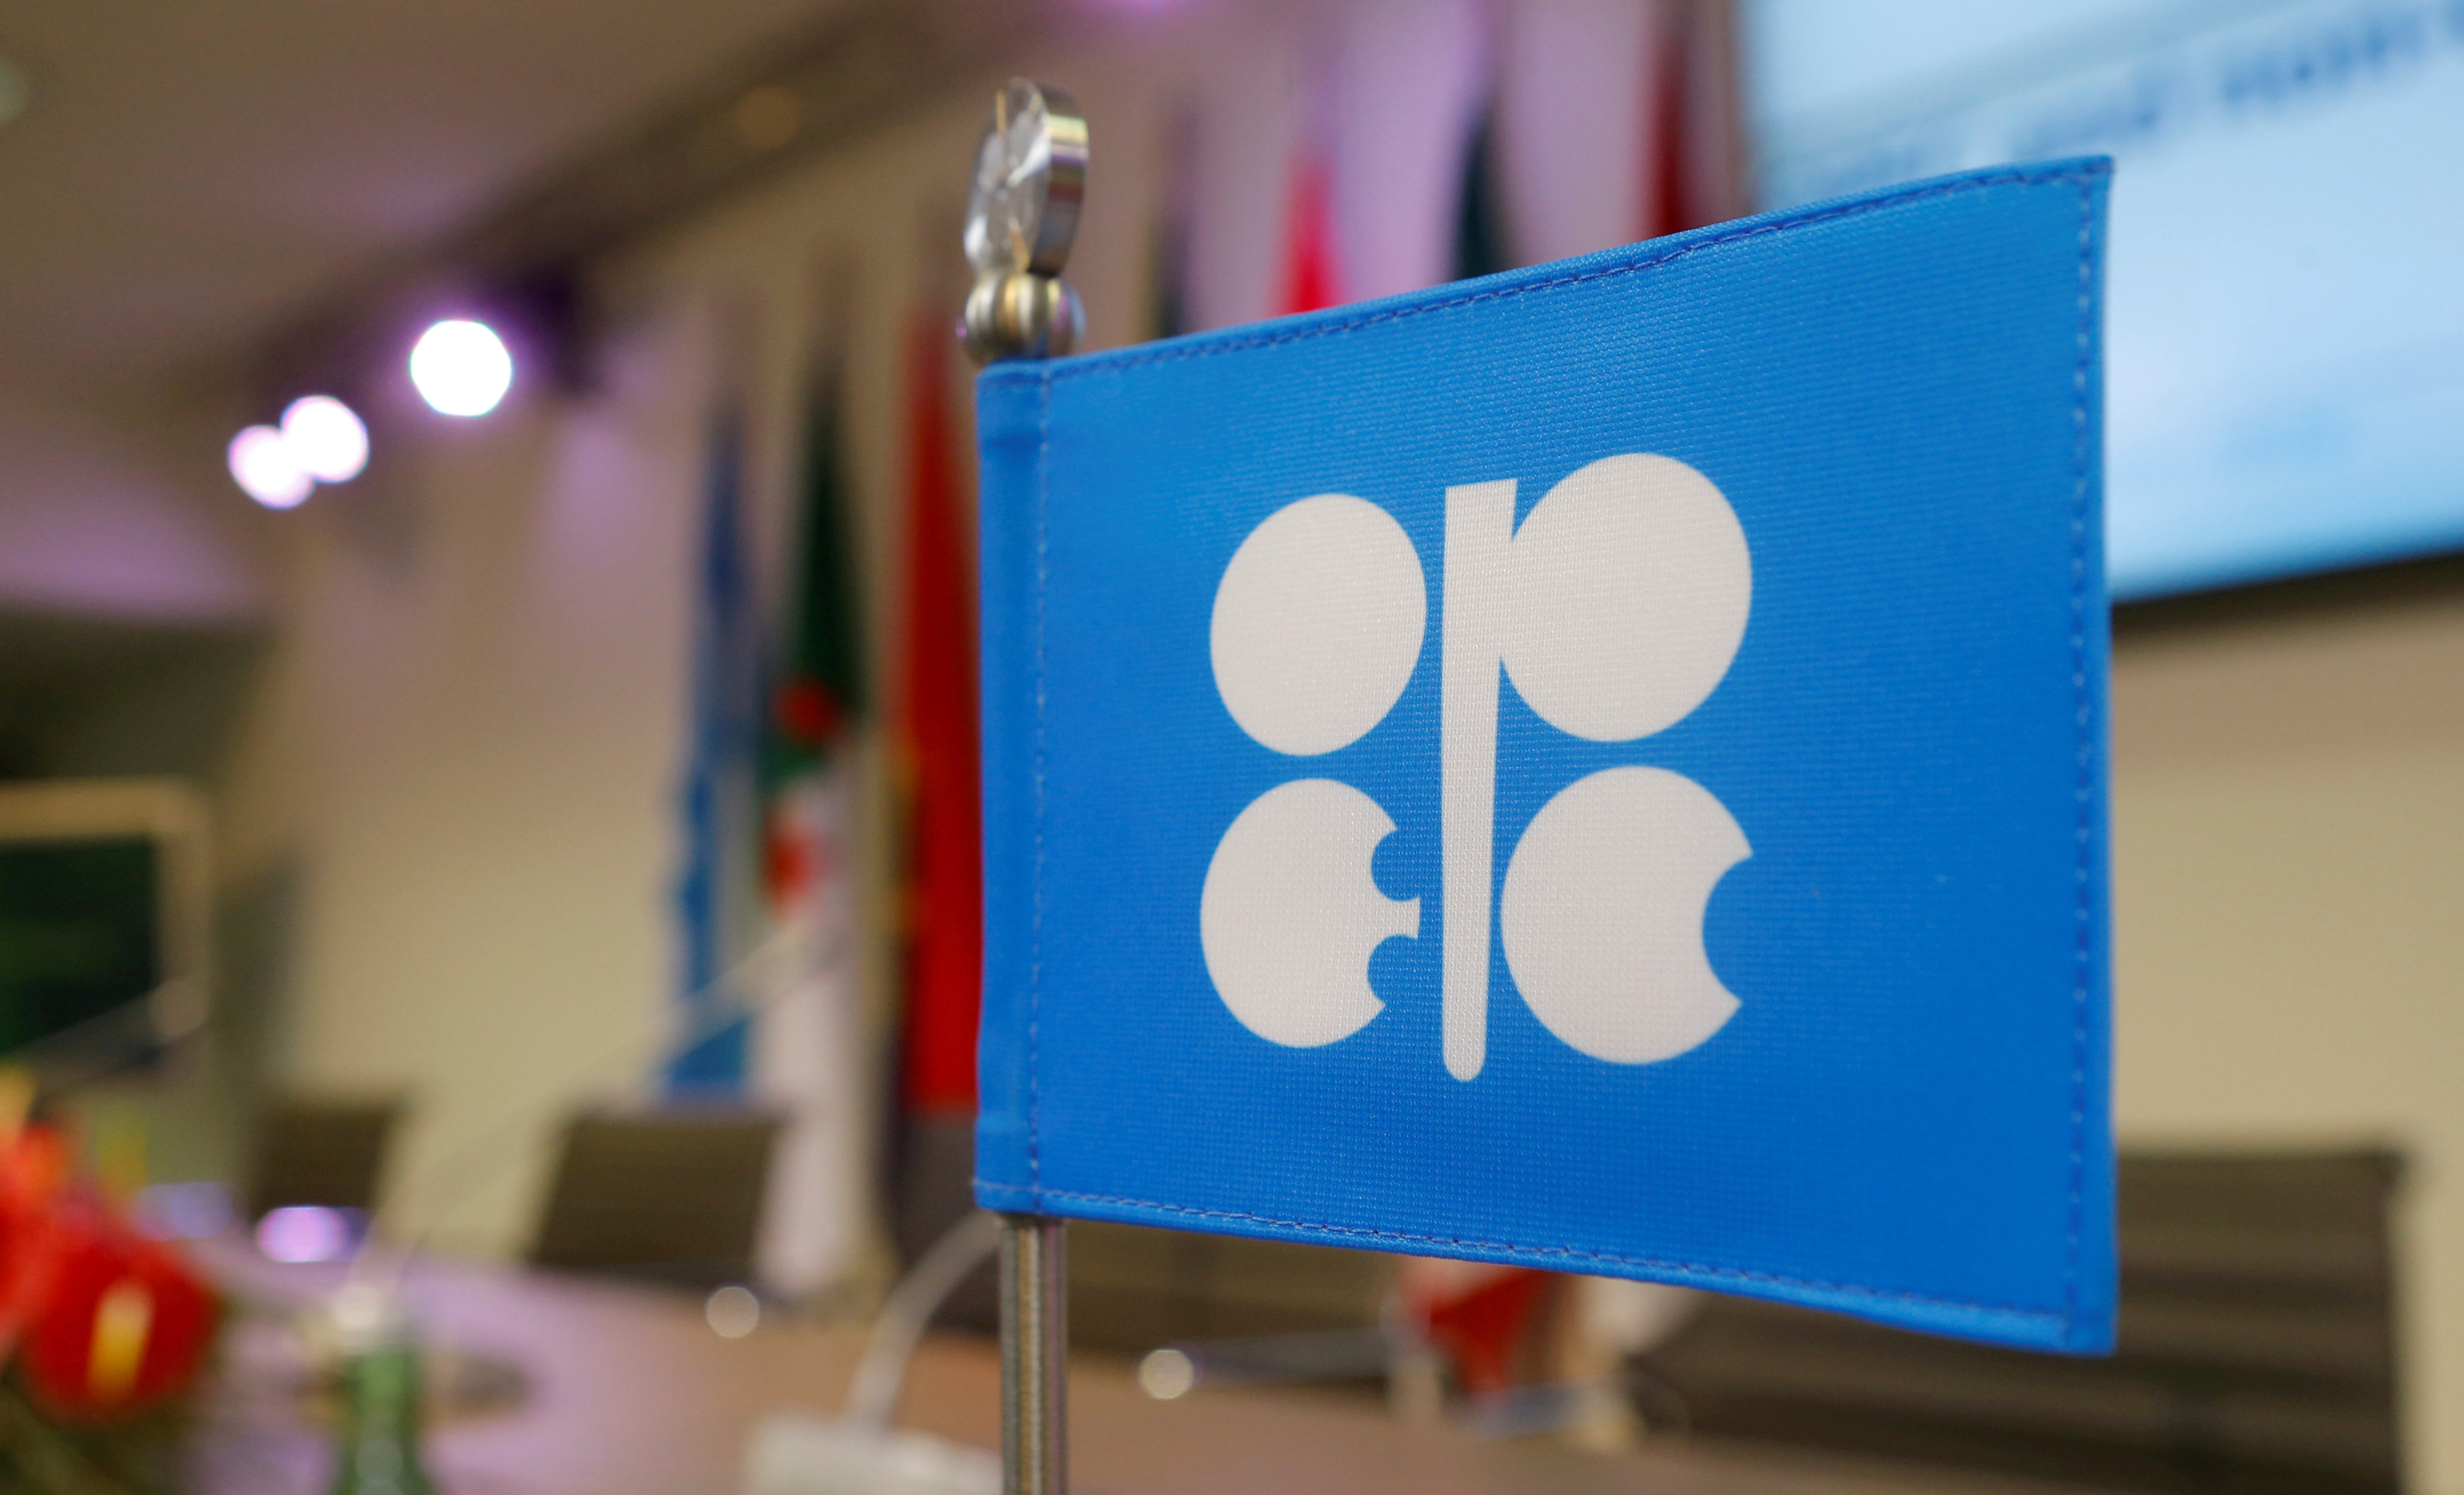 Opec says crude oil glut almost gone